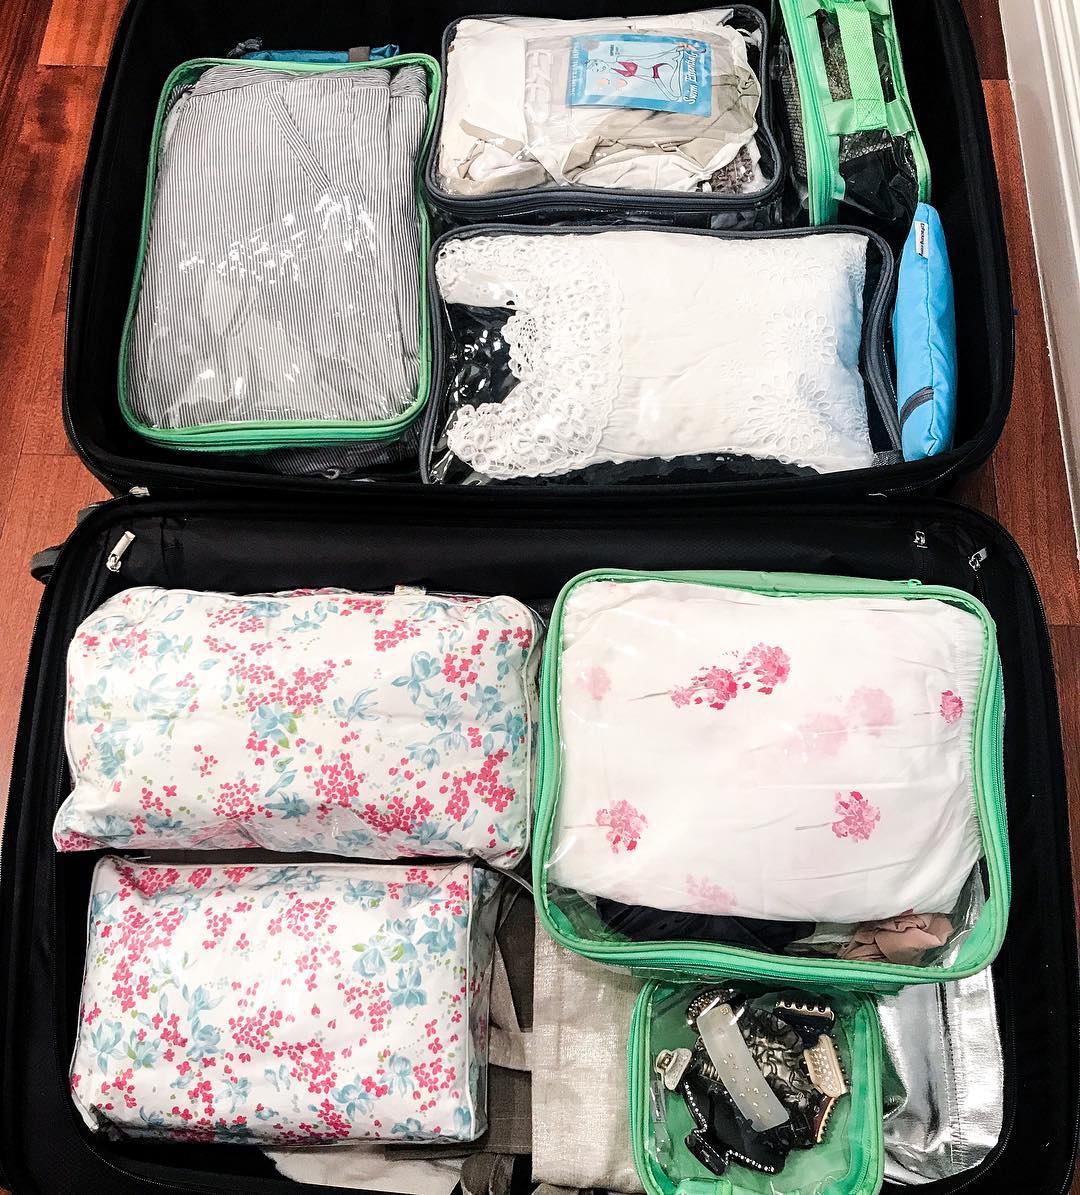 Stacking packing cubes horizontally for organized suitcase